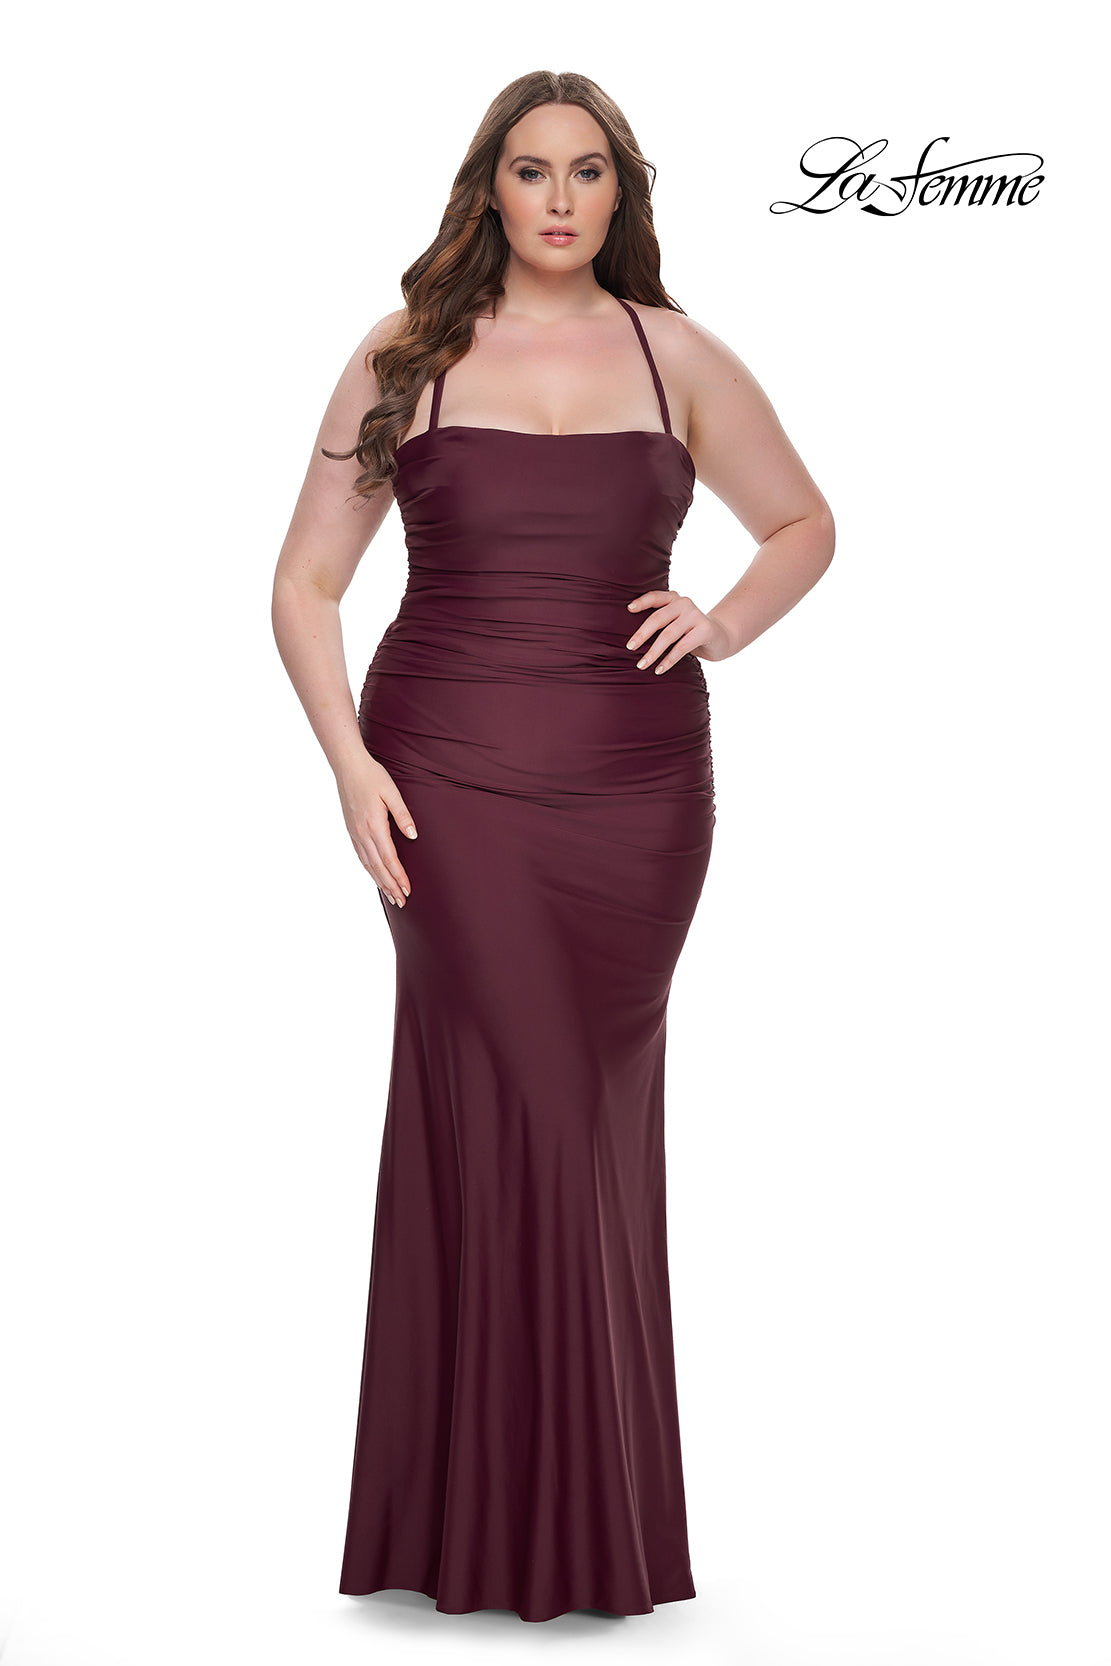 La-Femme-32195-Square-Neckline-Lace-up-Back-Ruched-Jersey-Fitted-Dark-Wine-Evening-Dress-B-Chic-Fashions-Prom-Dress